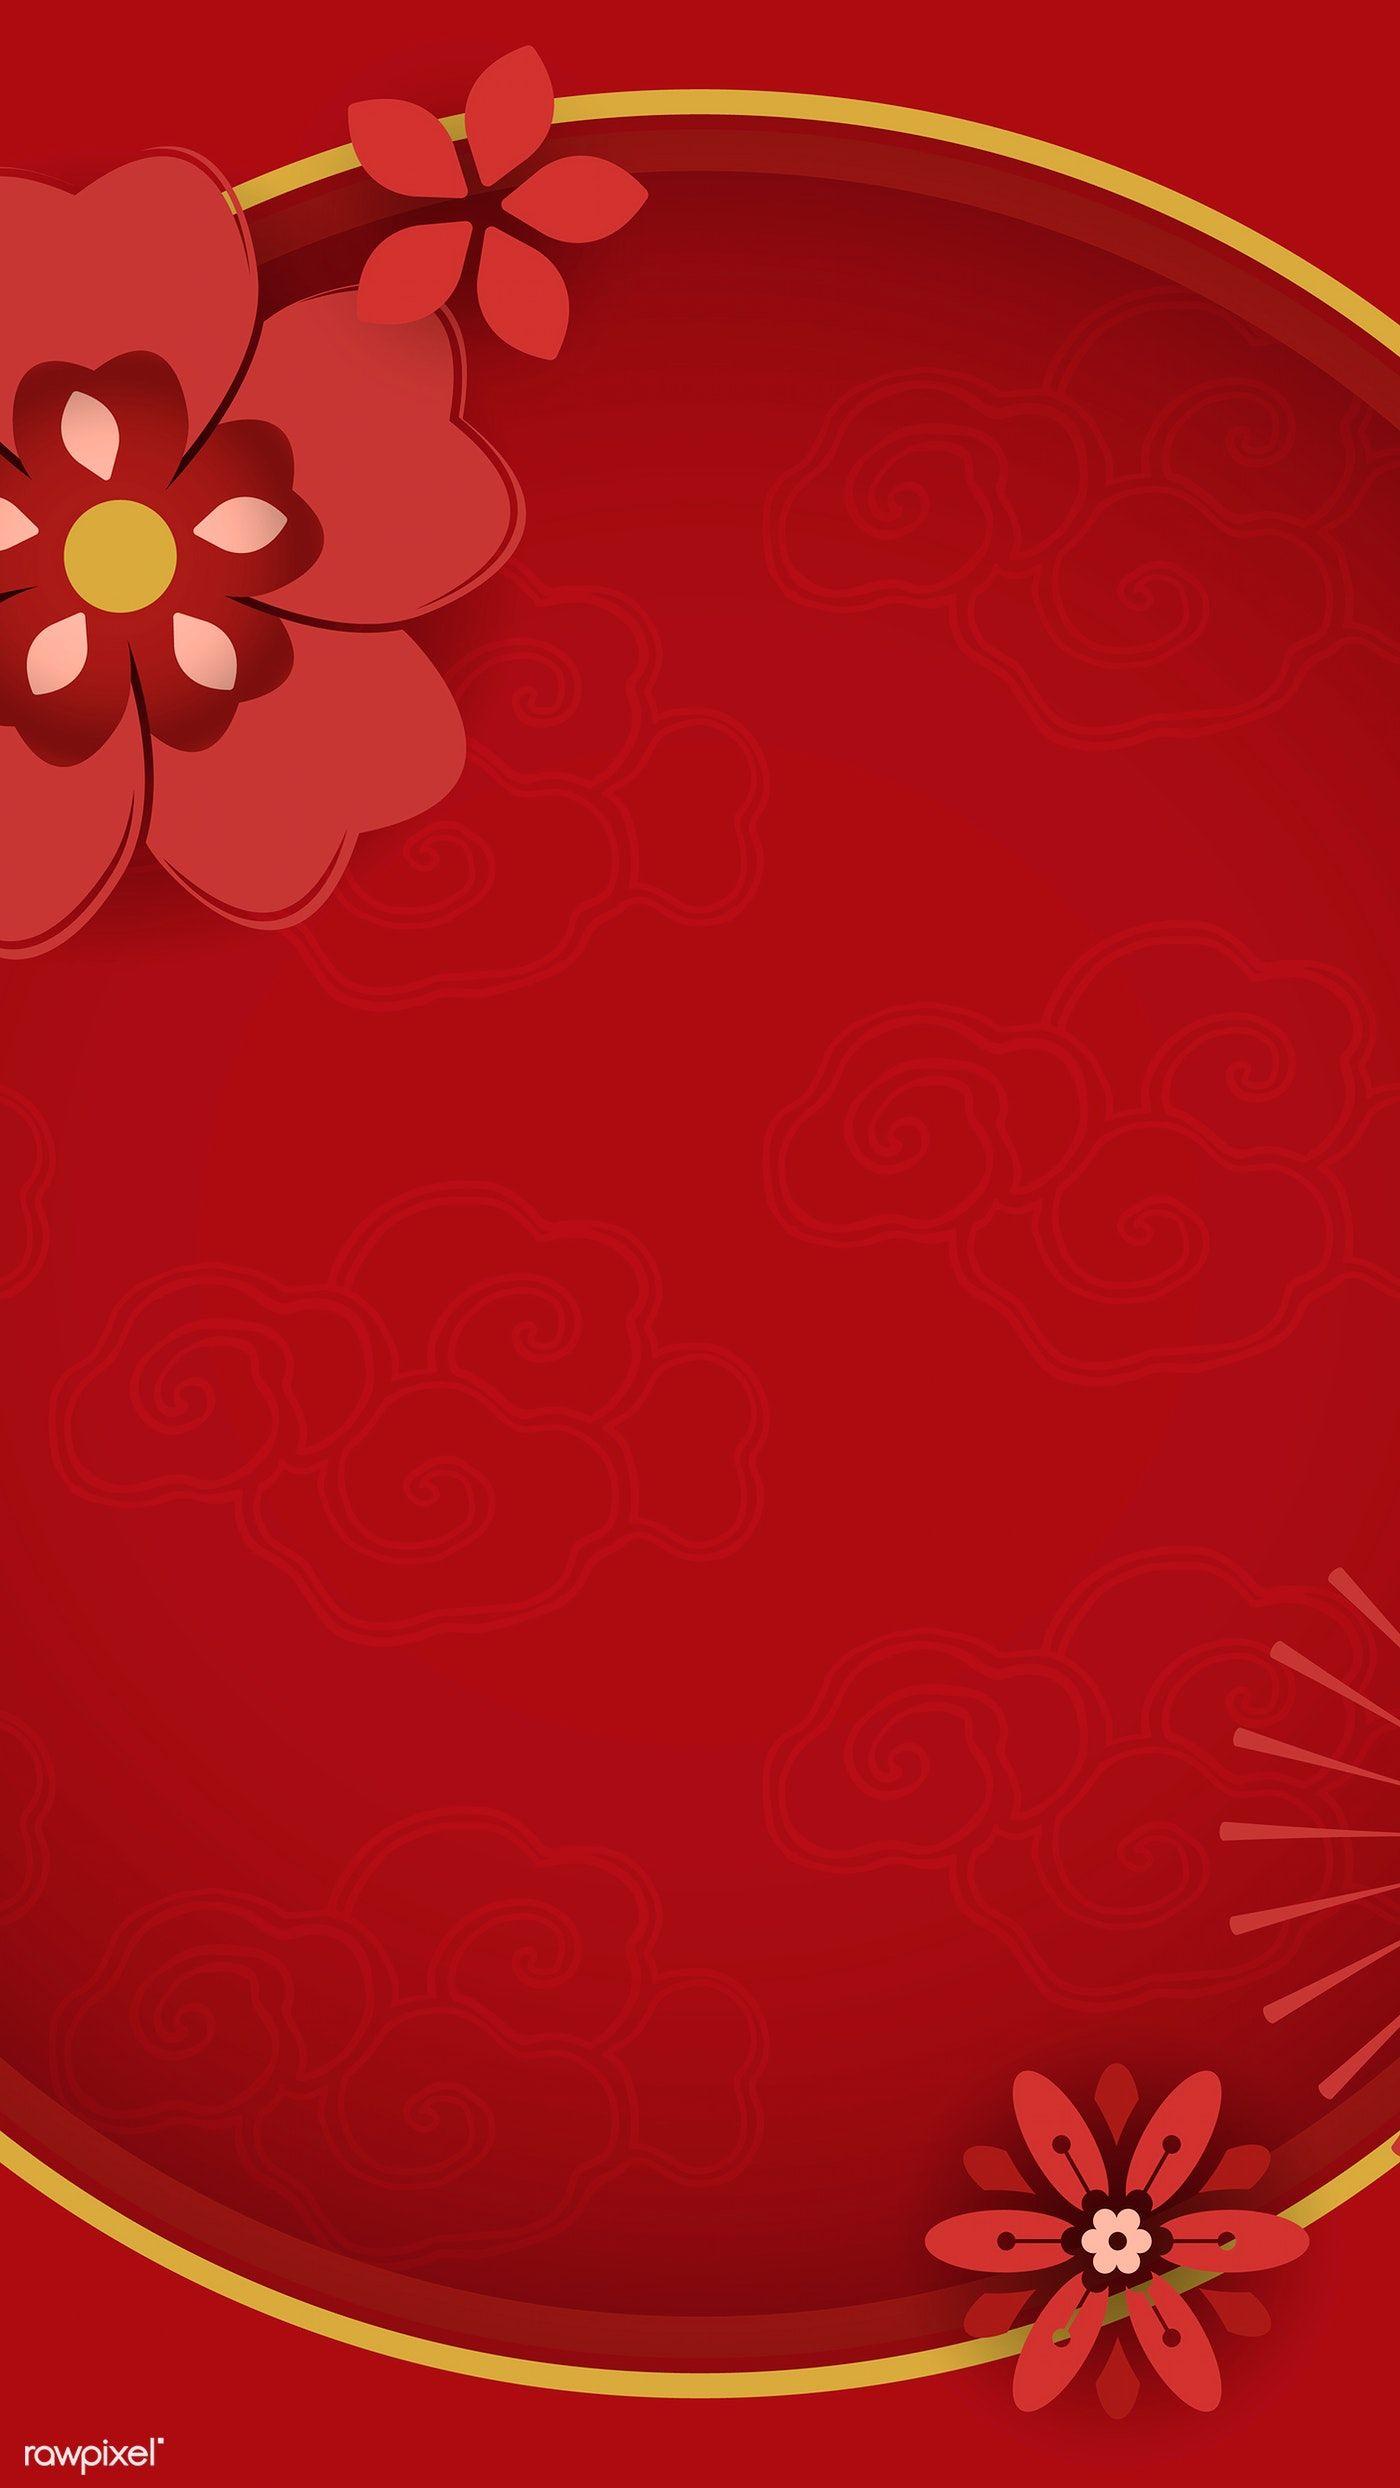 Chinese New Year 2020 iPhone wallpaper